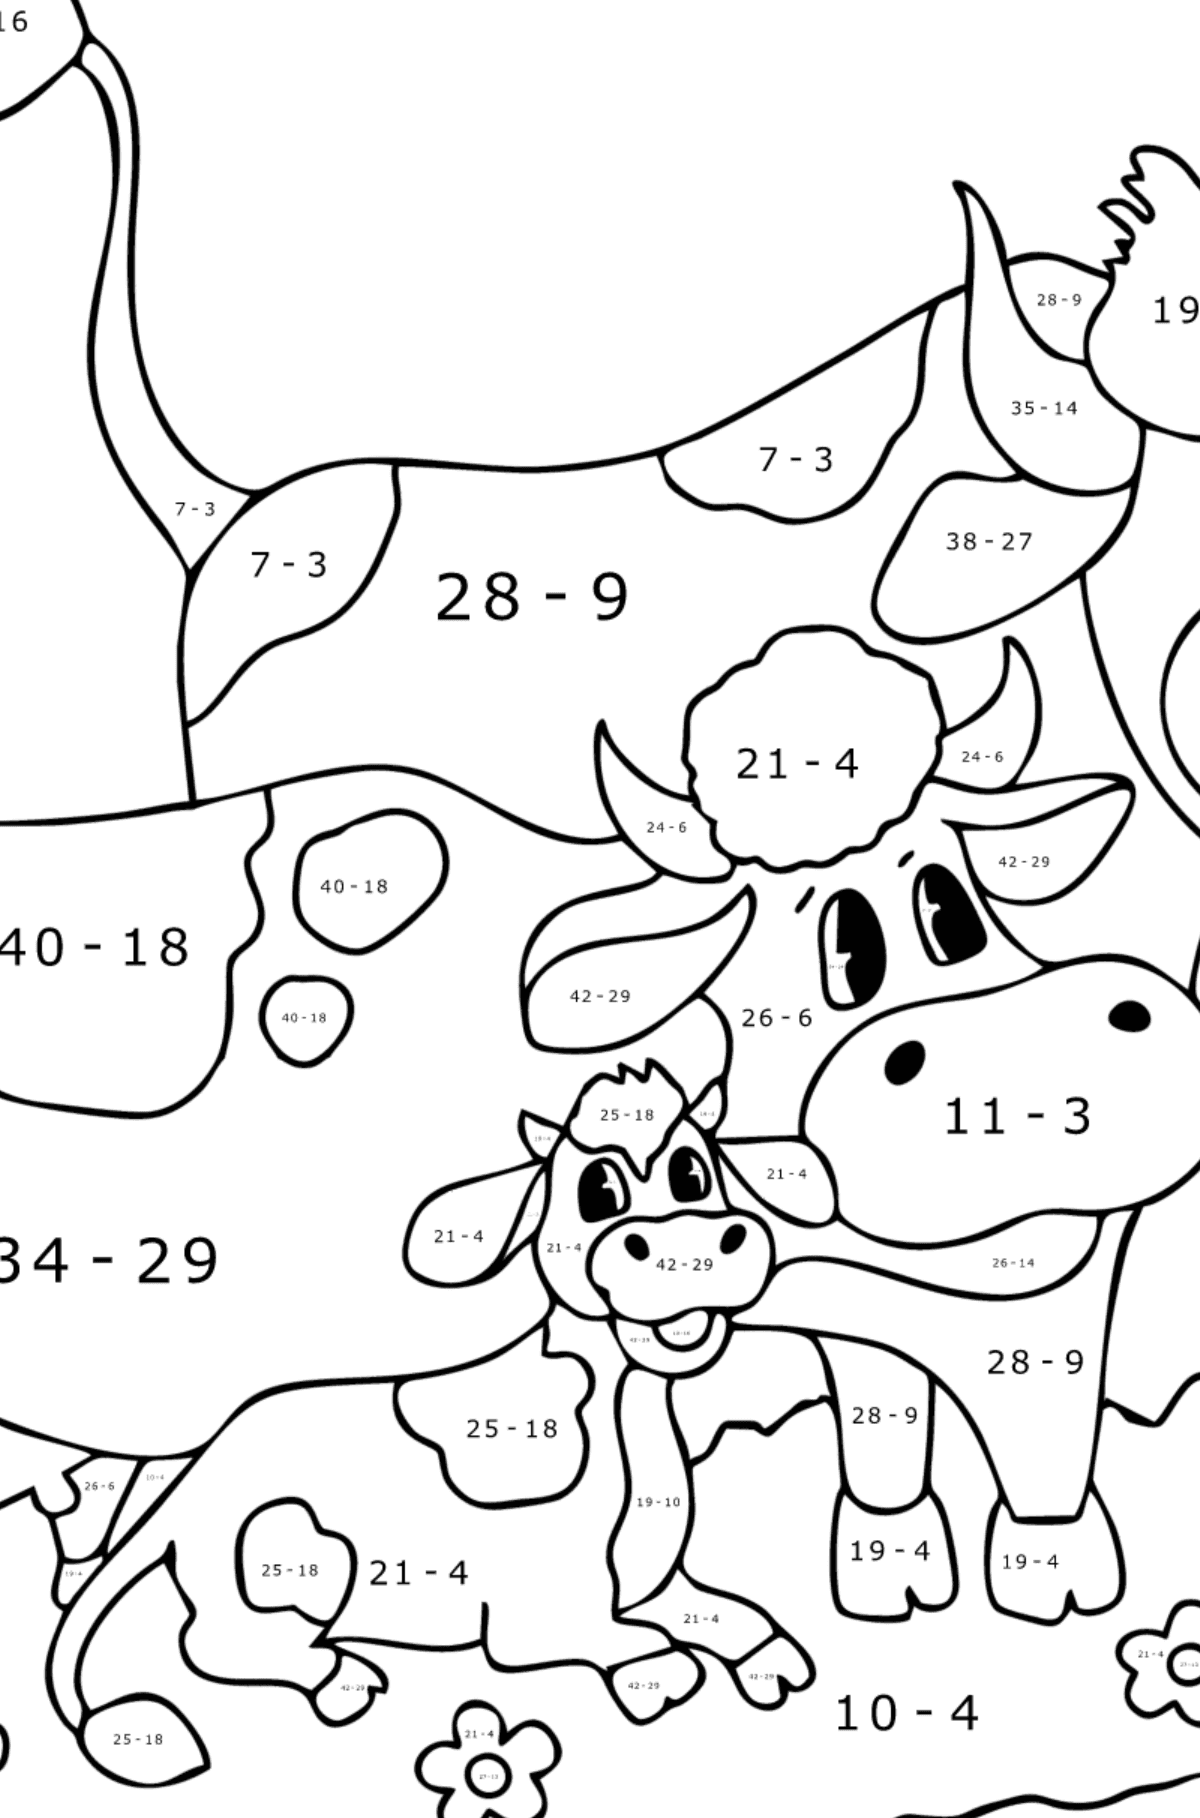 Cow, bull and calf coloring page - Math Coloring - Subtraction for Kids